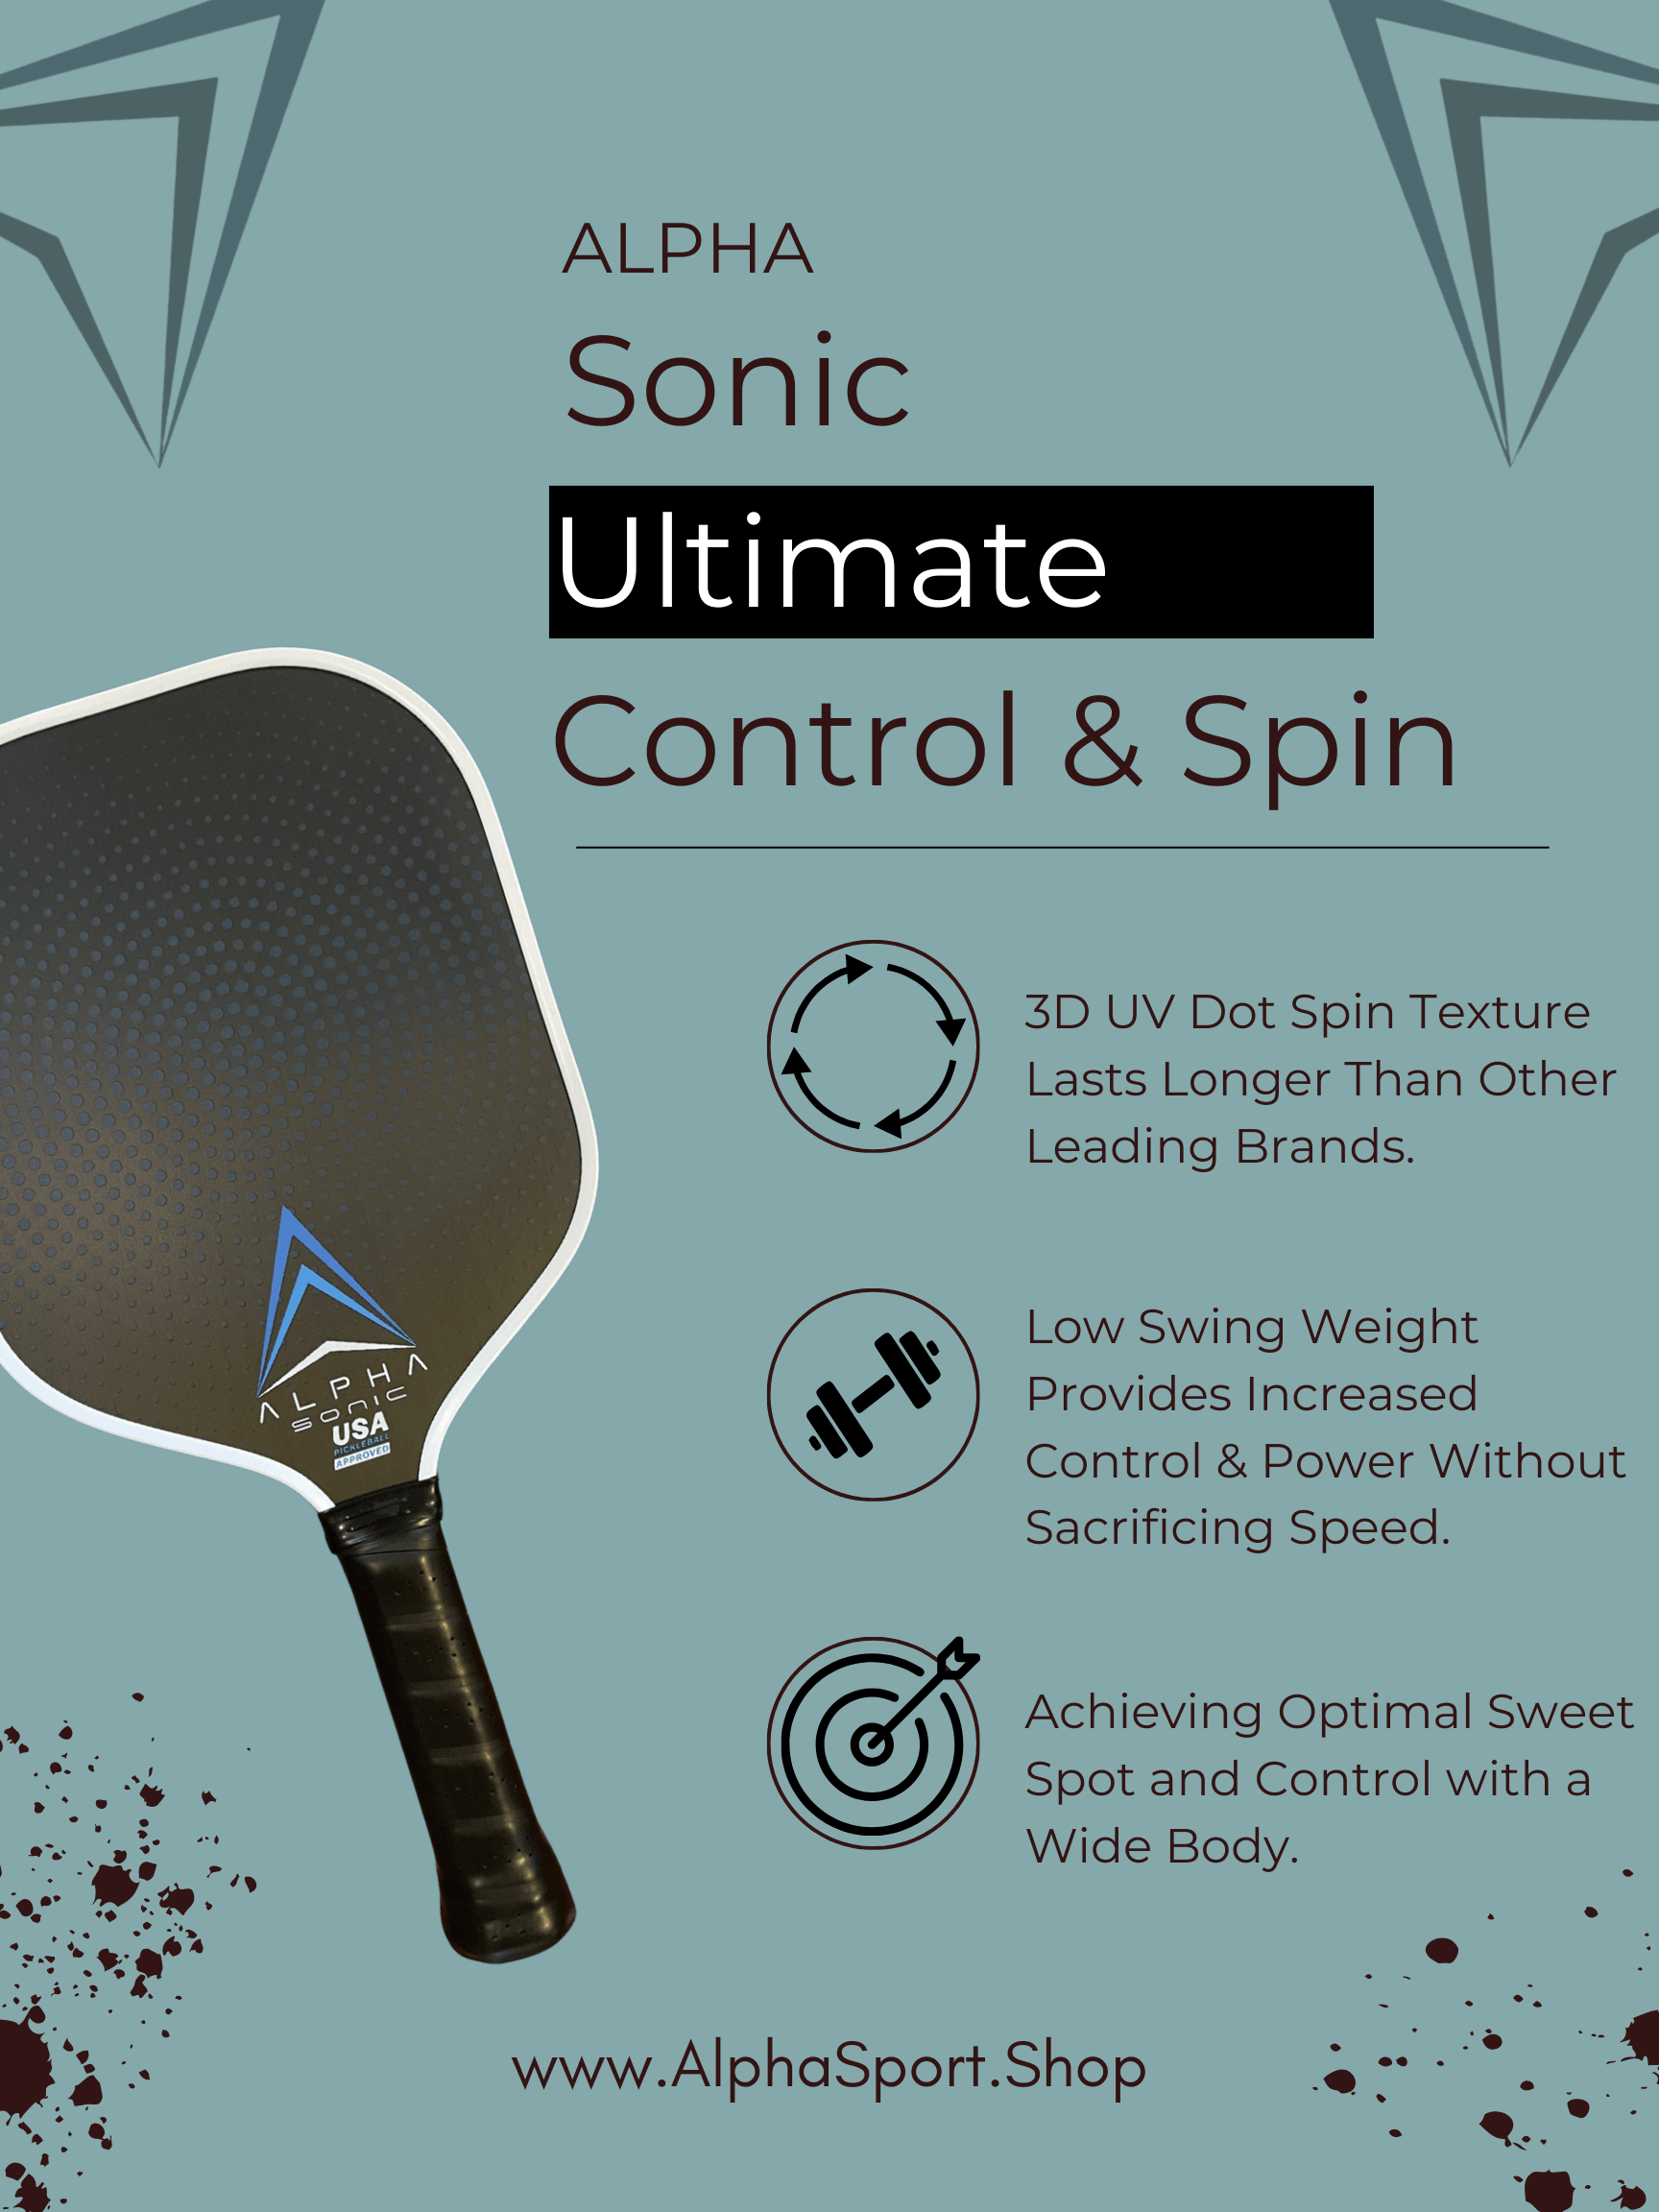 Alpha Sonic Wide Body 17mm Pickleball Paddle - Pickleball Paddle Shop